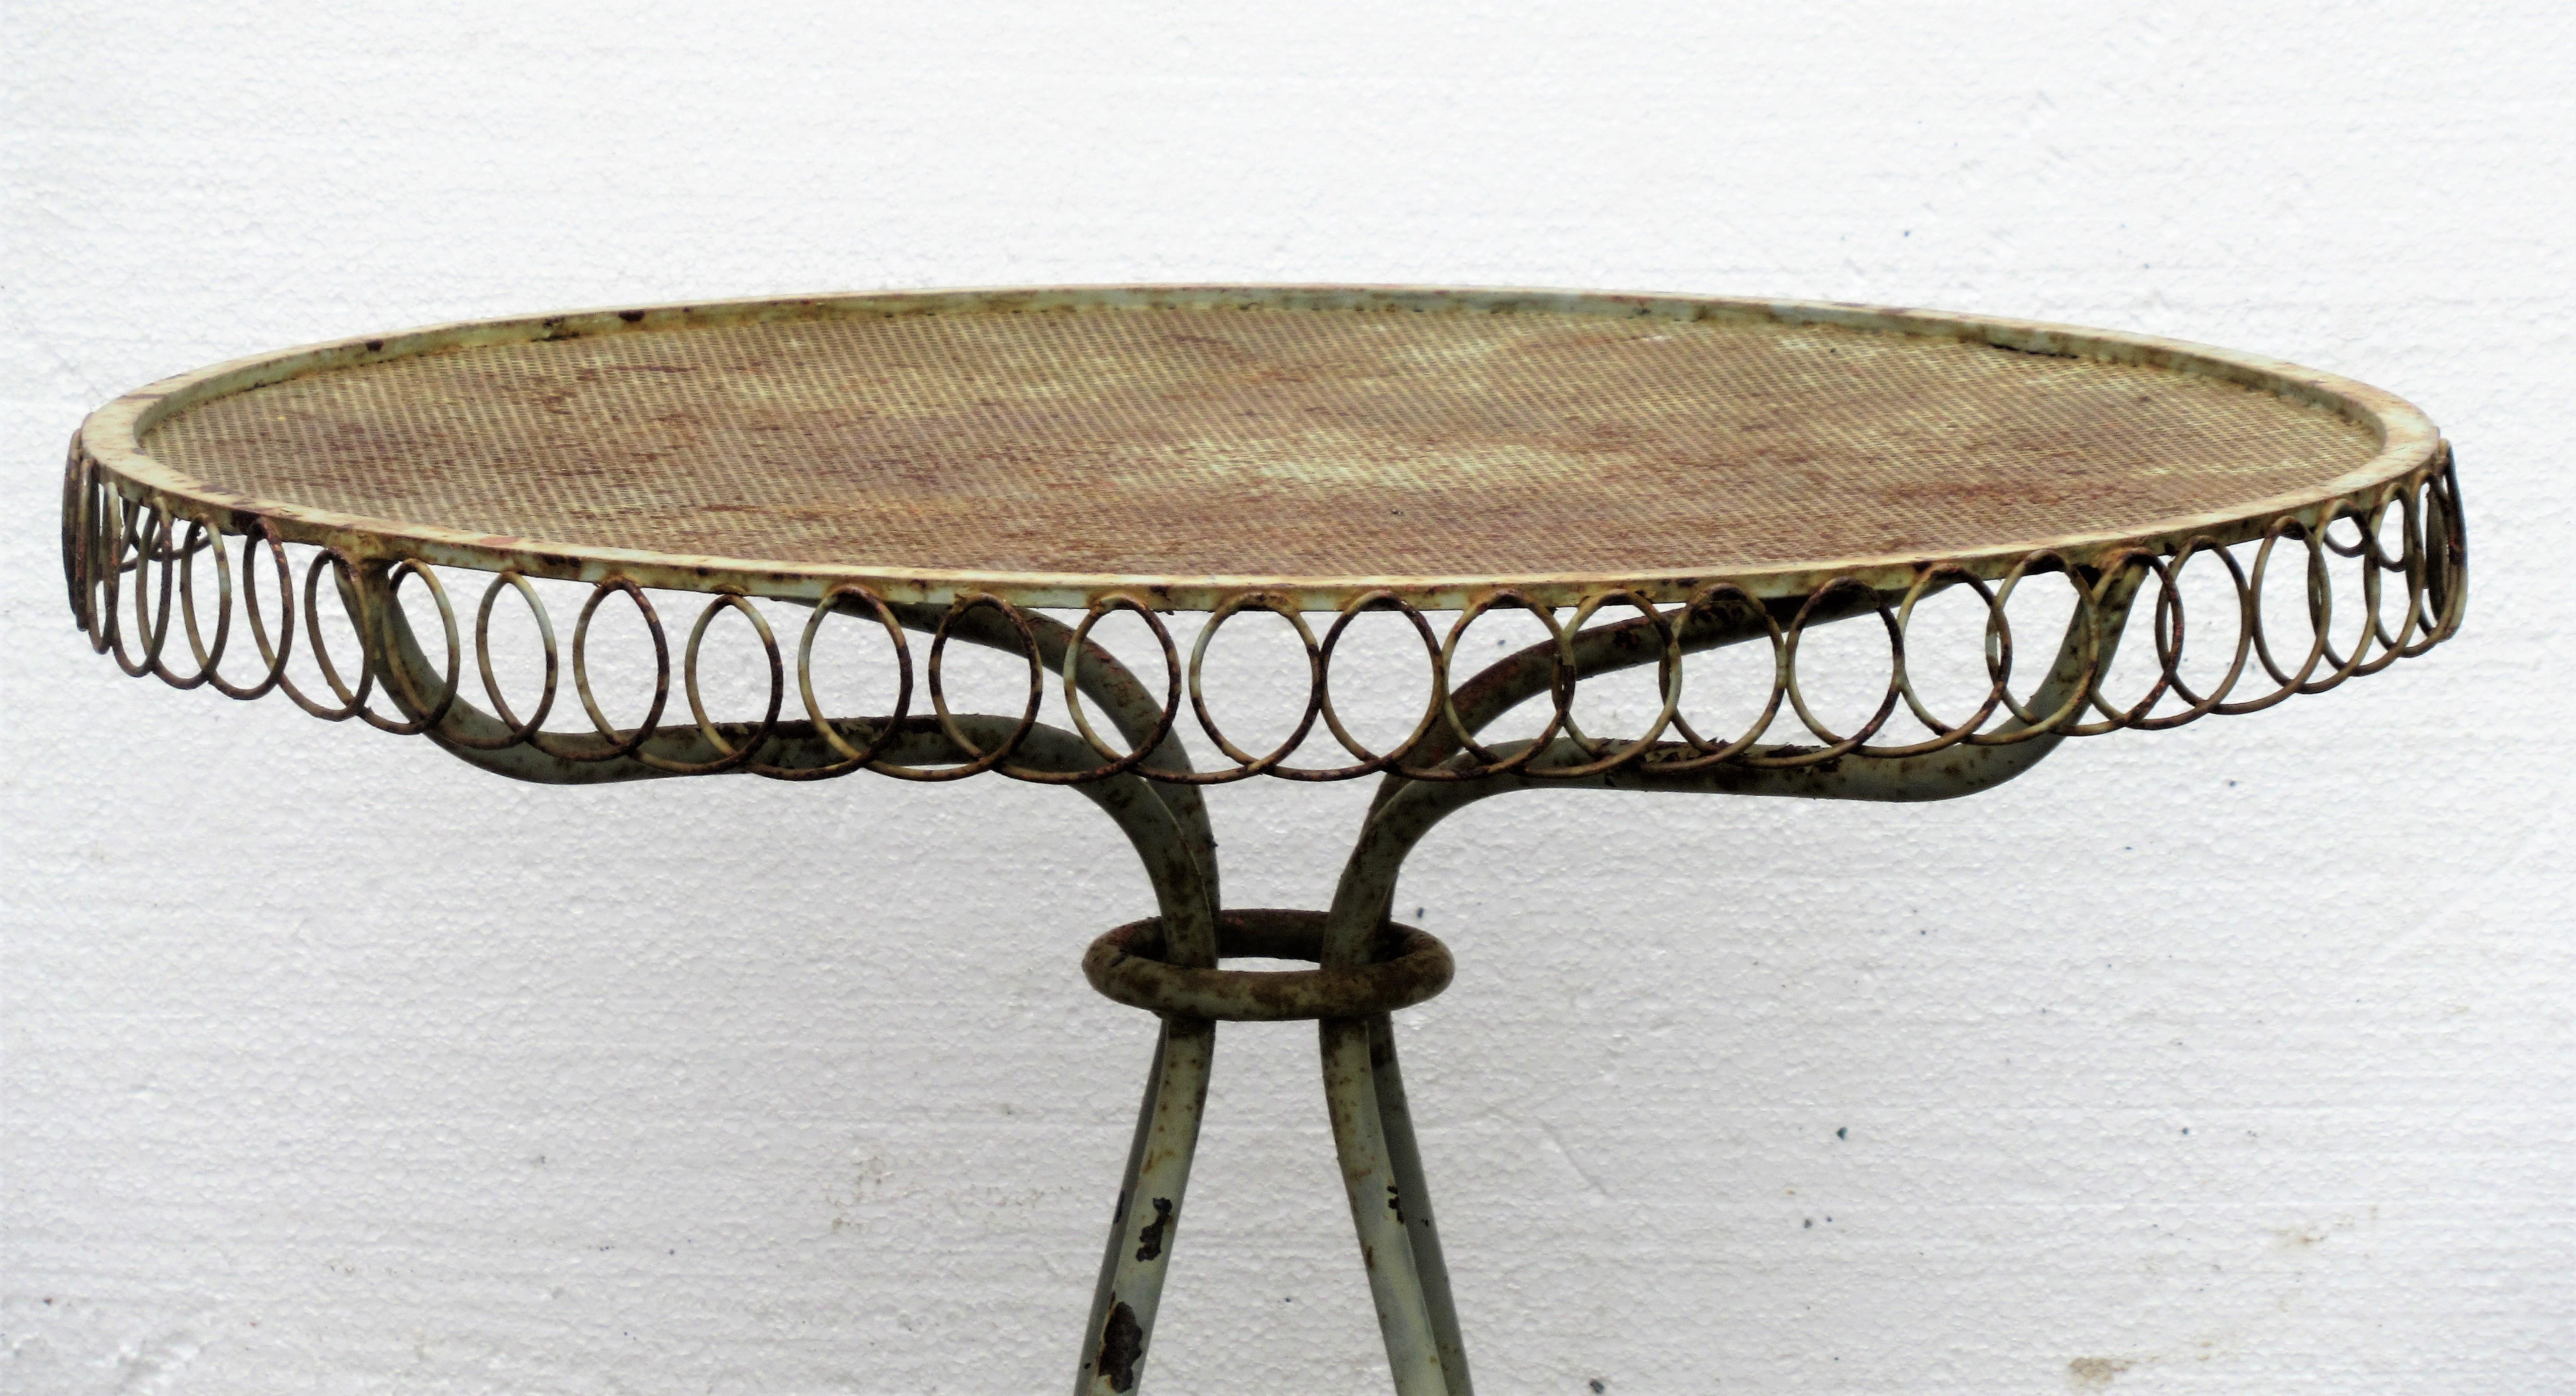 Antique French wire and iron garden small bistro type table with fine mesh top in overall beautifully aged old worn pale celery green painted surface. Exceptional quality, circa 1900 - 1930. This one's a gem.
 Look at all pictures and read condition